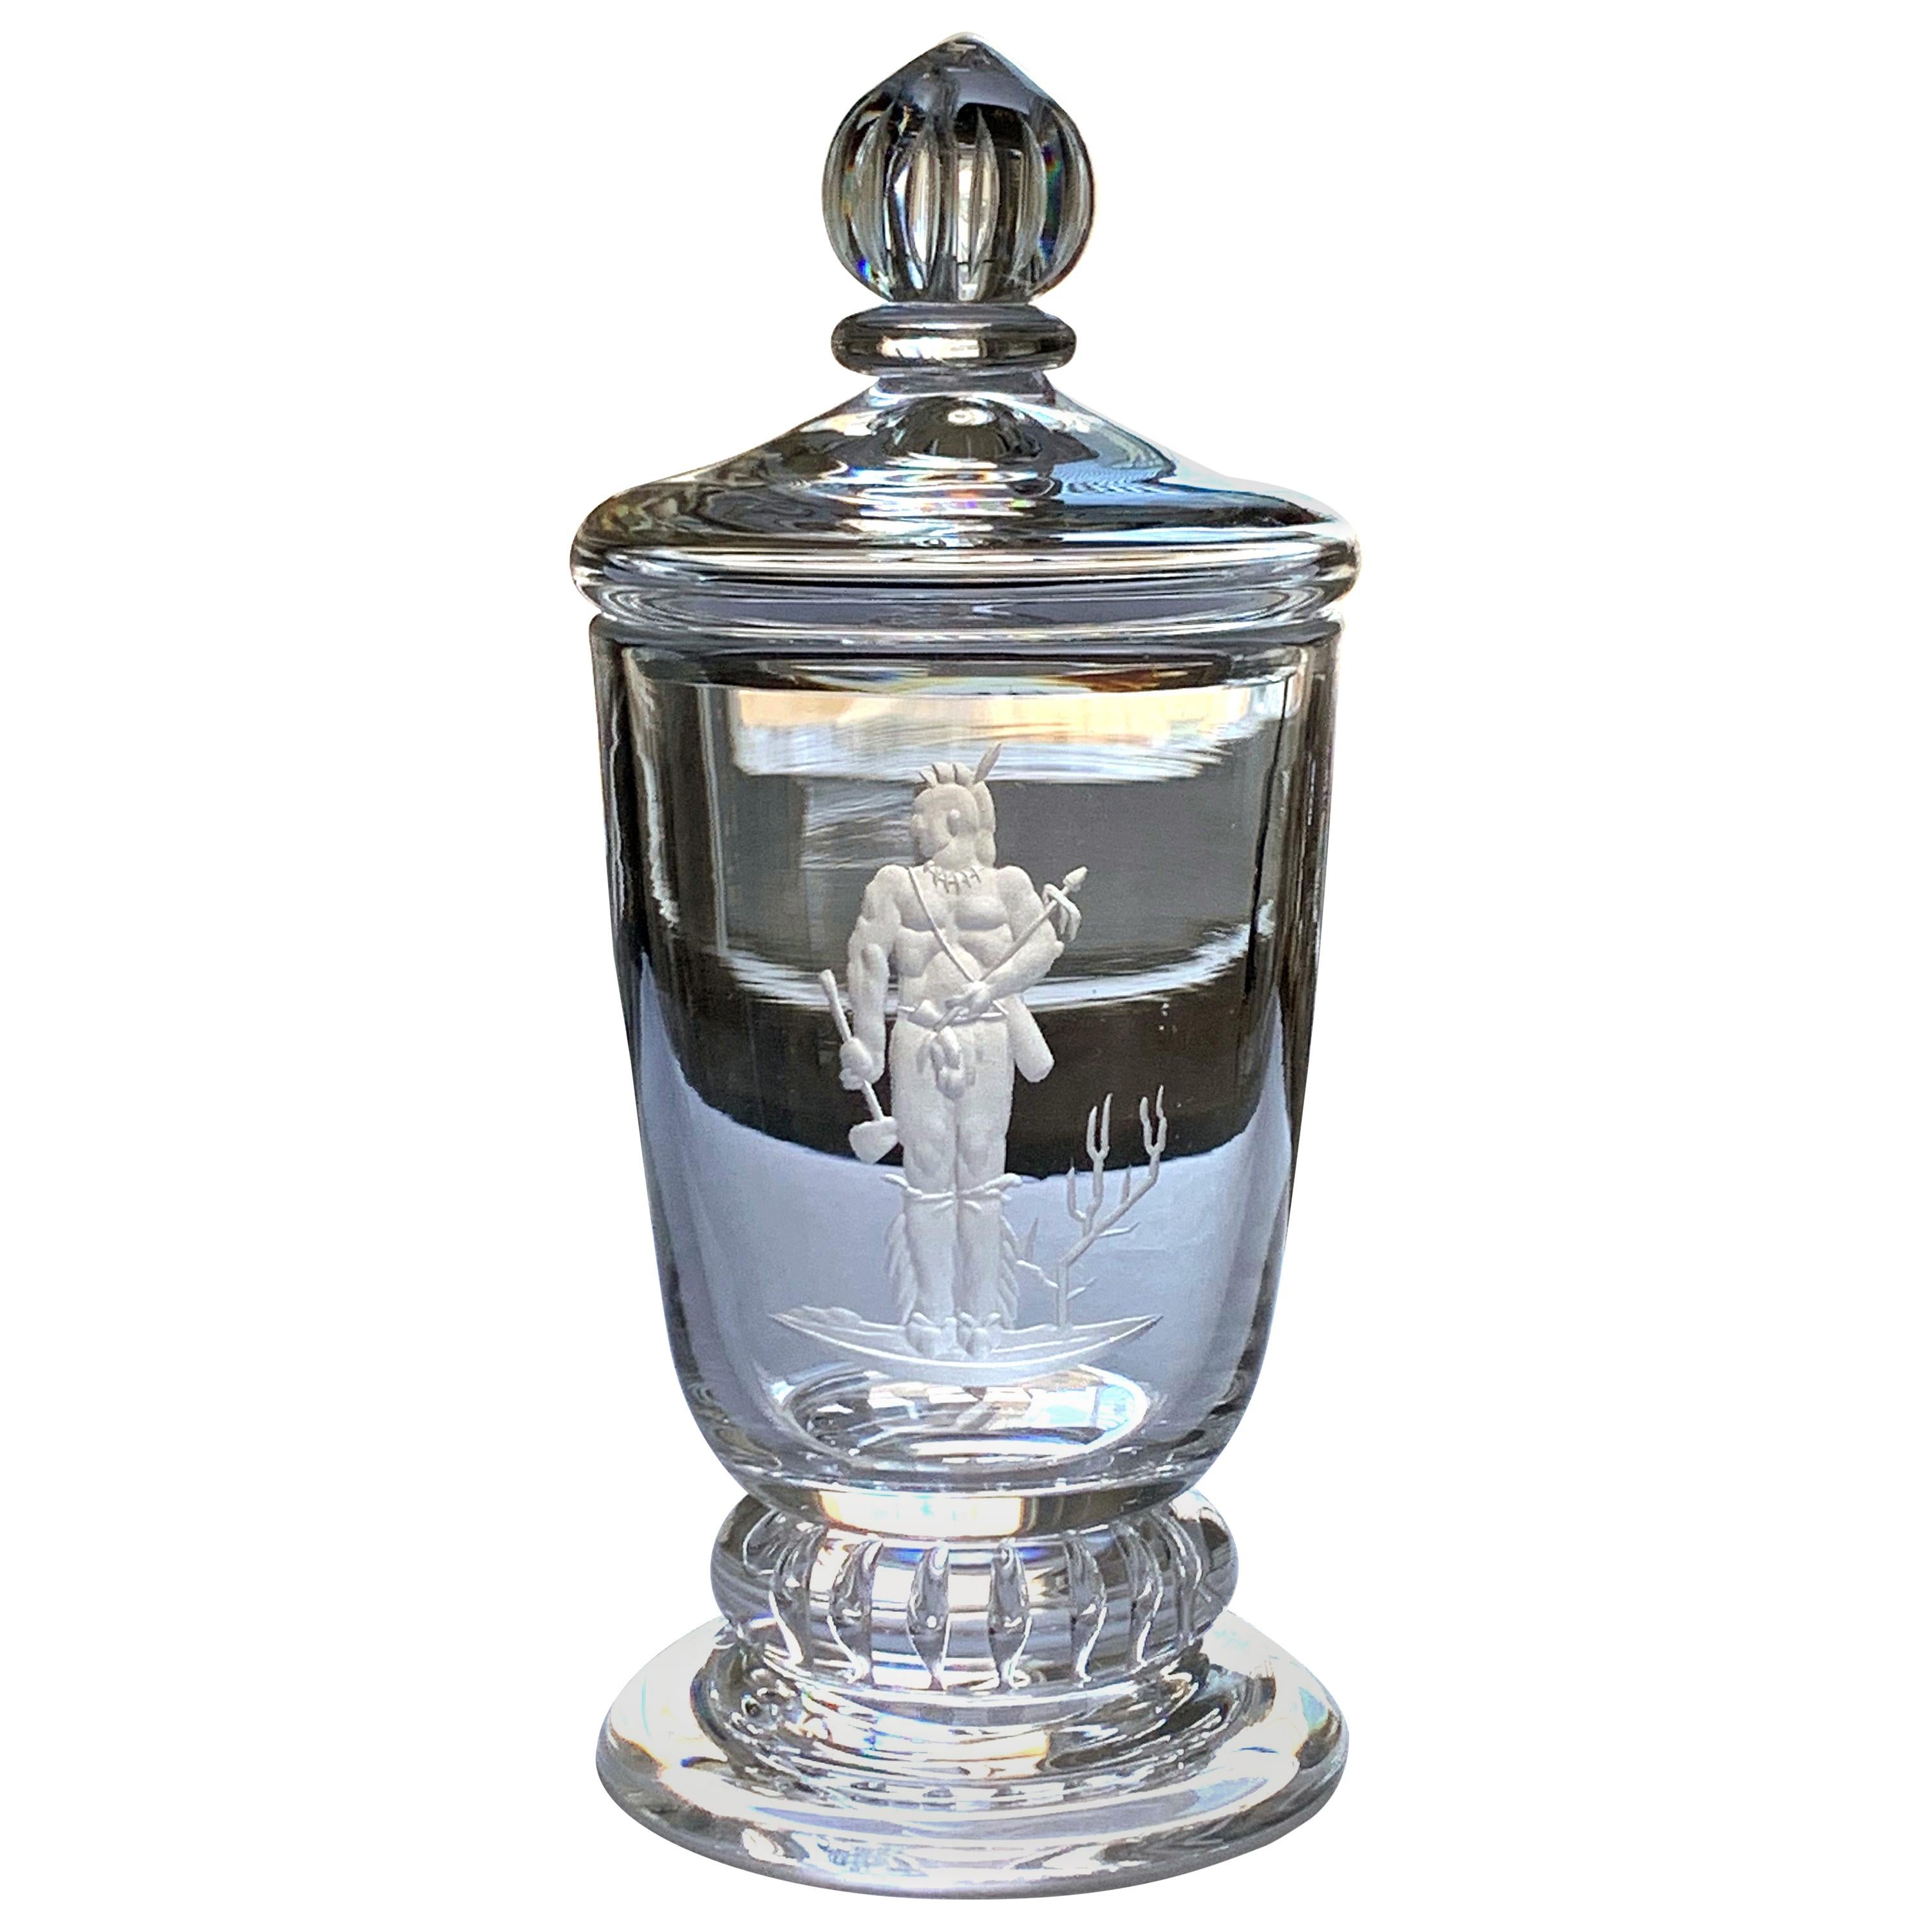 "Indian Brave, " Rare, Important Art Deco Covered Urn by Waugh for Steuben